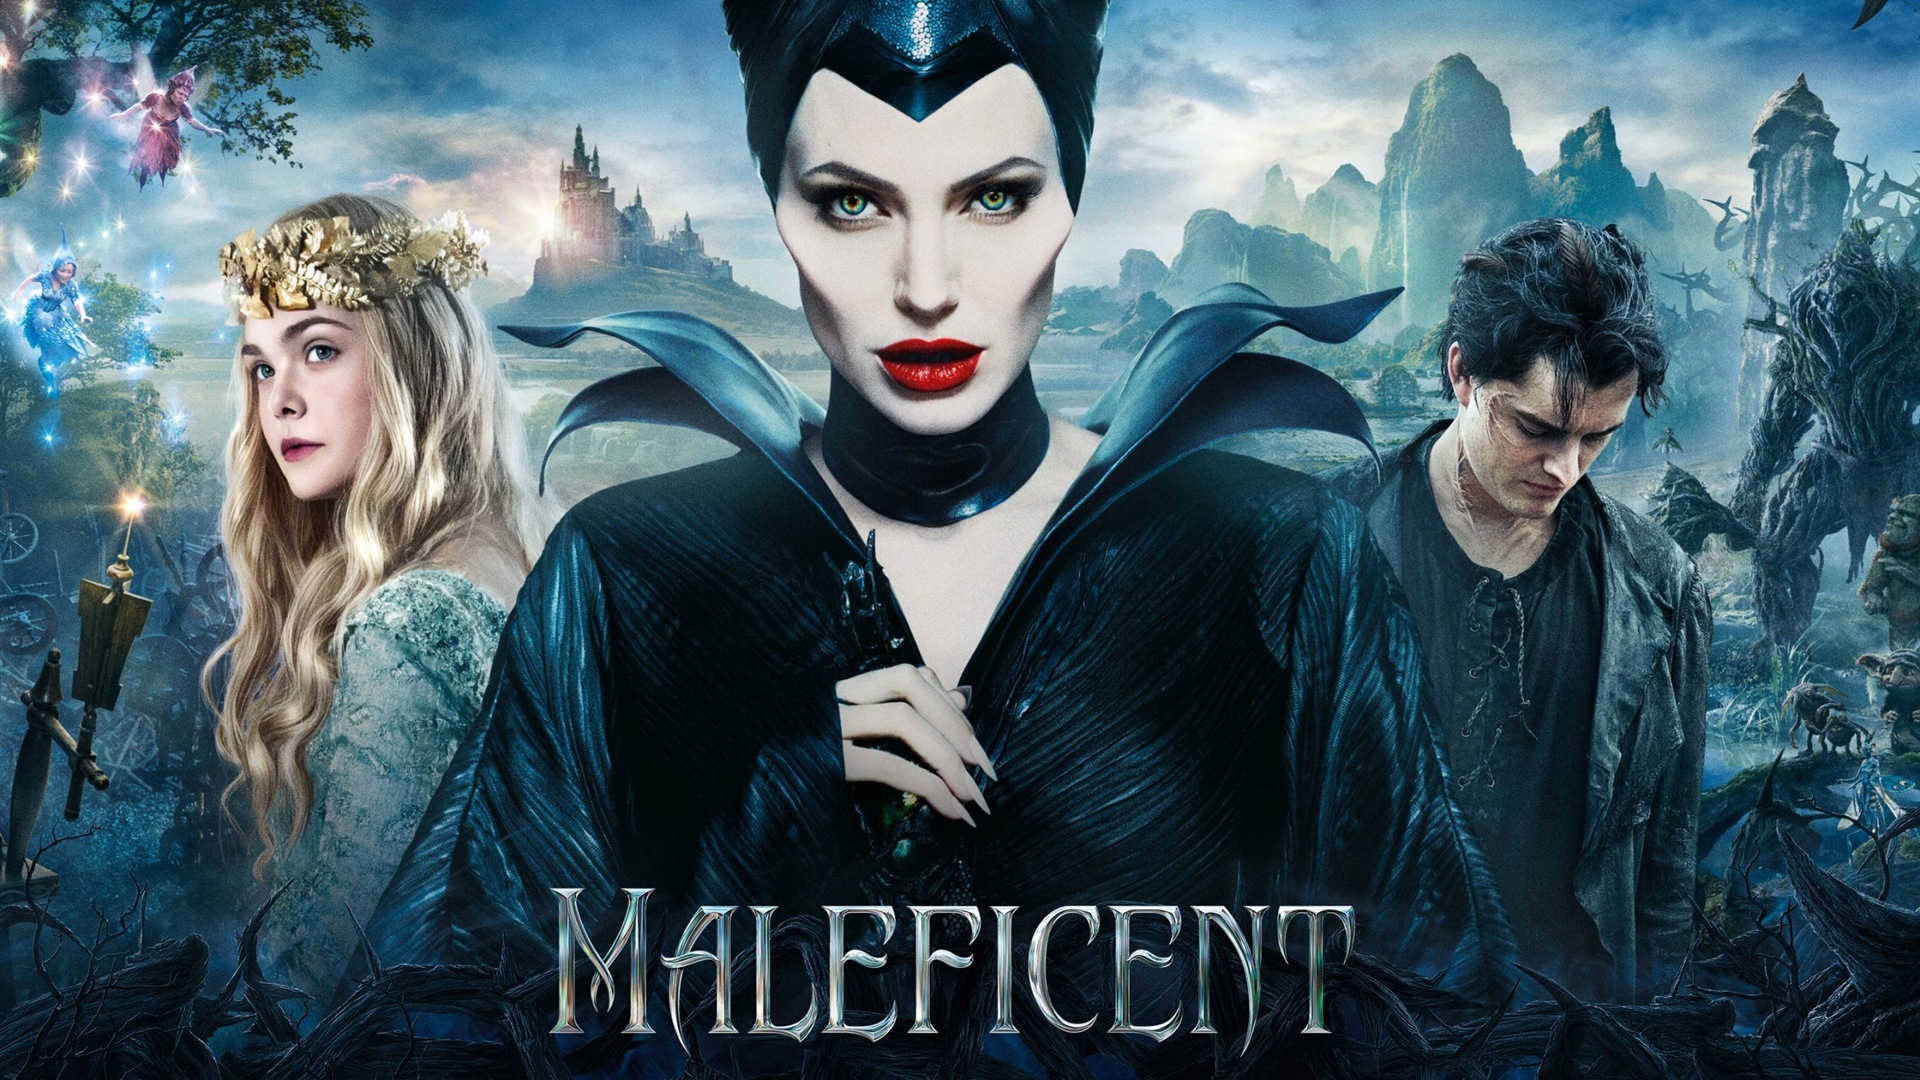 Maleficent 2014 HD movie wallpapers #1 - 1920x1080